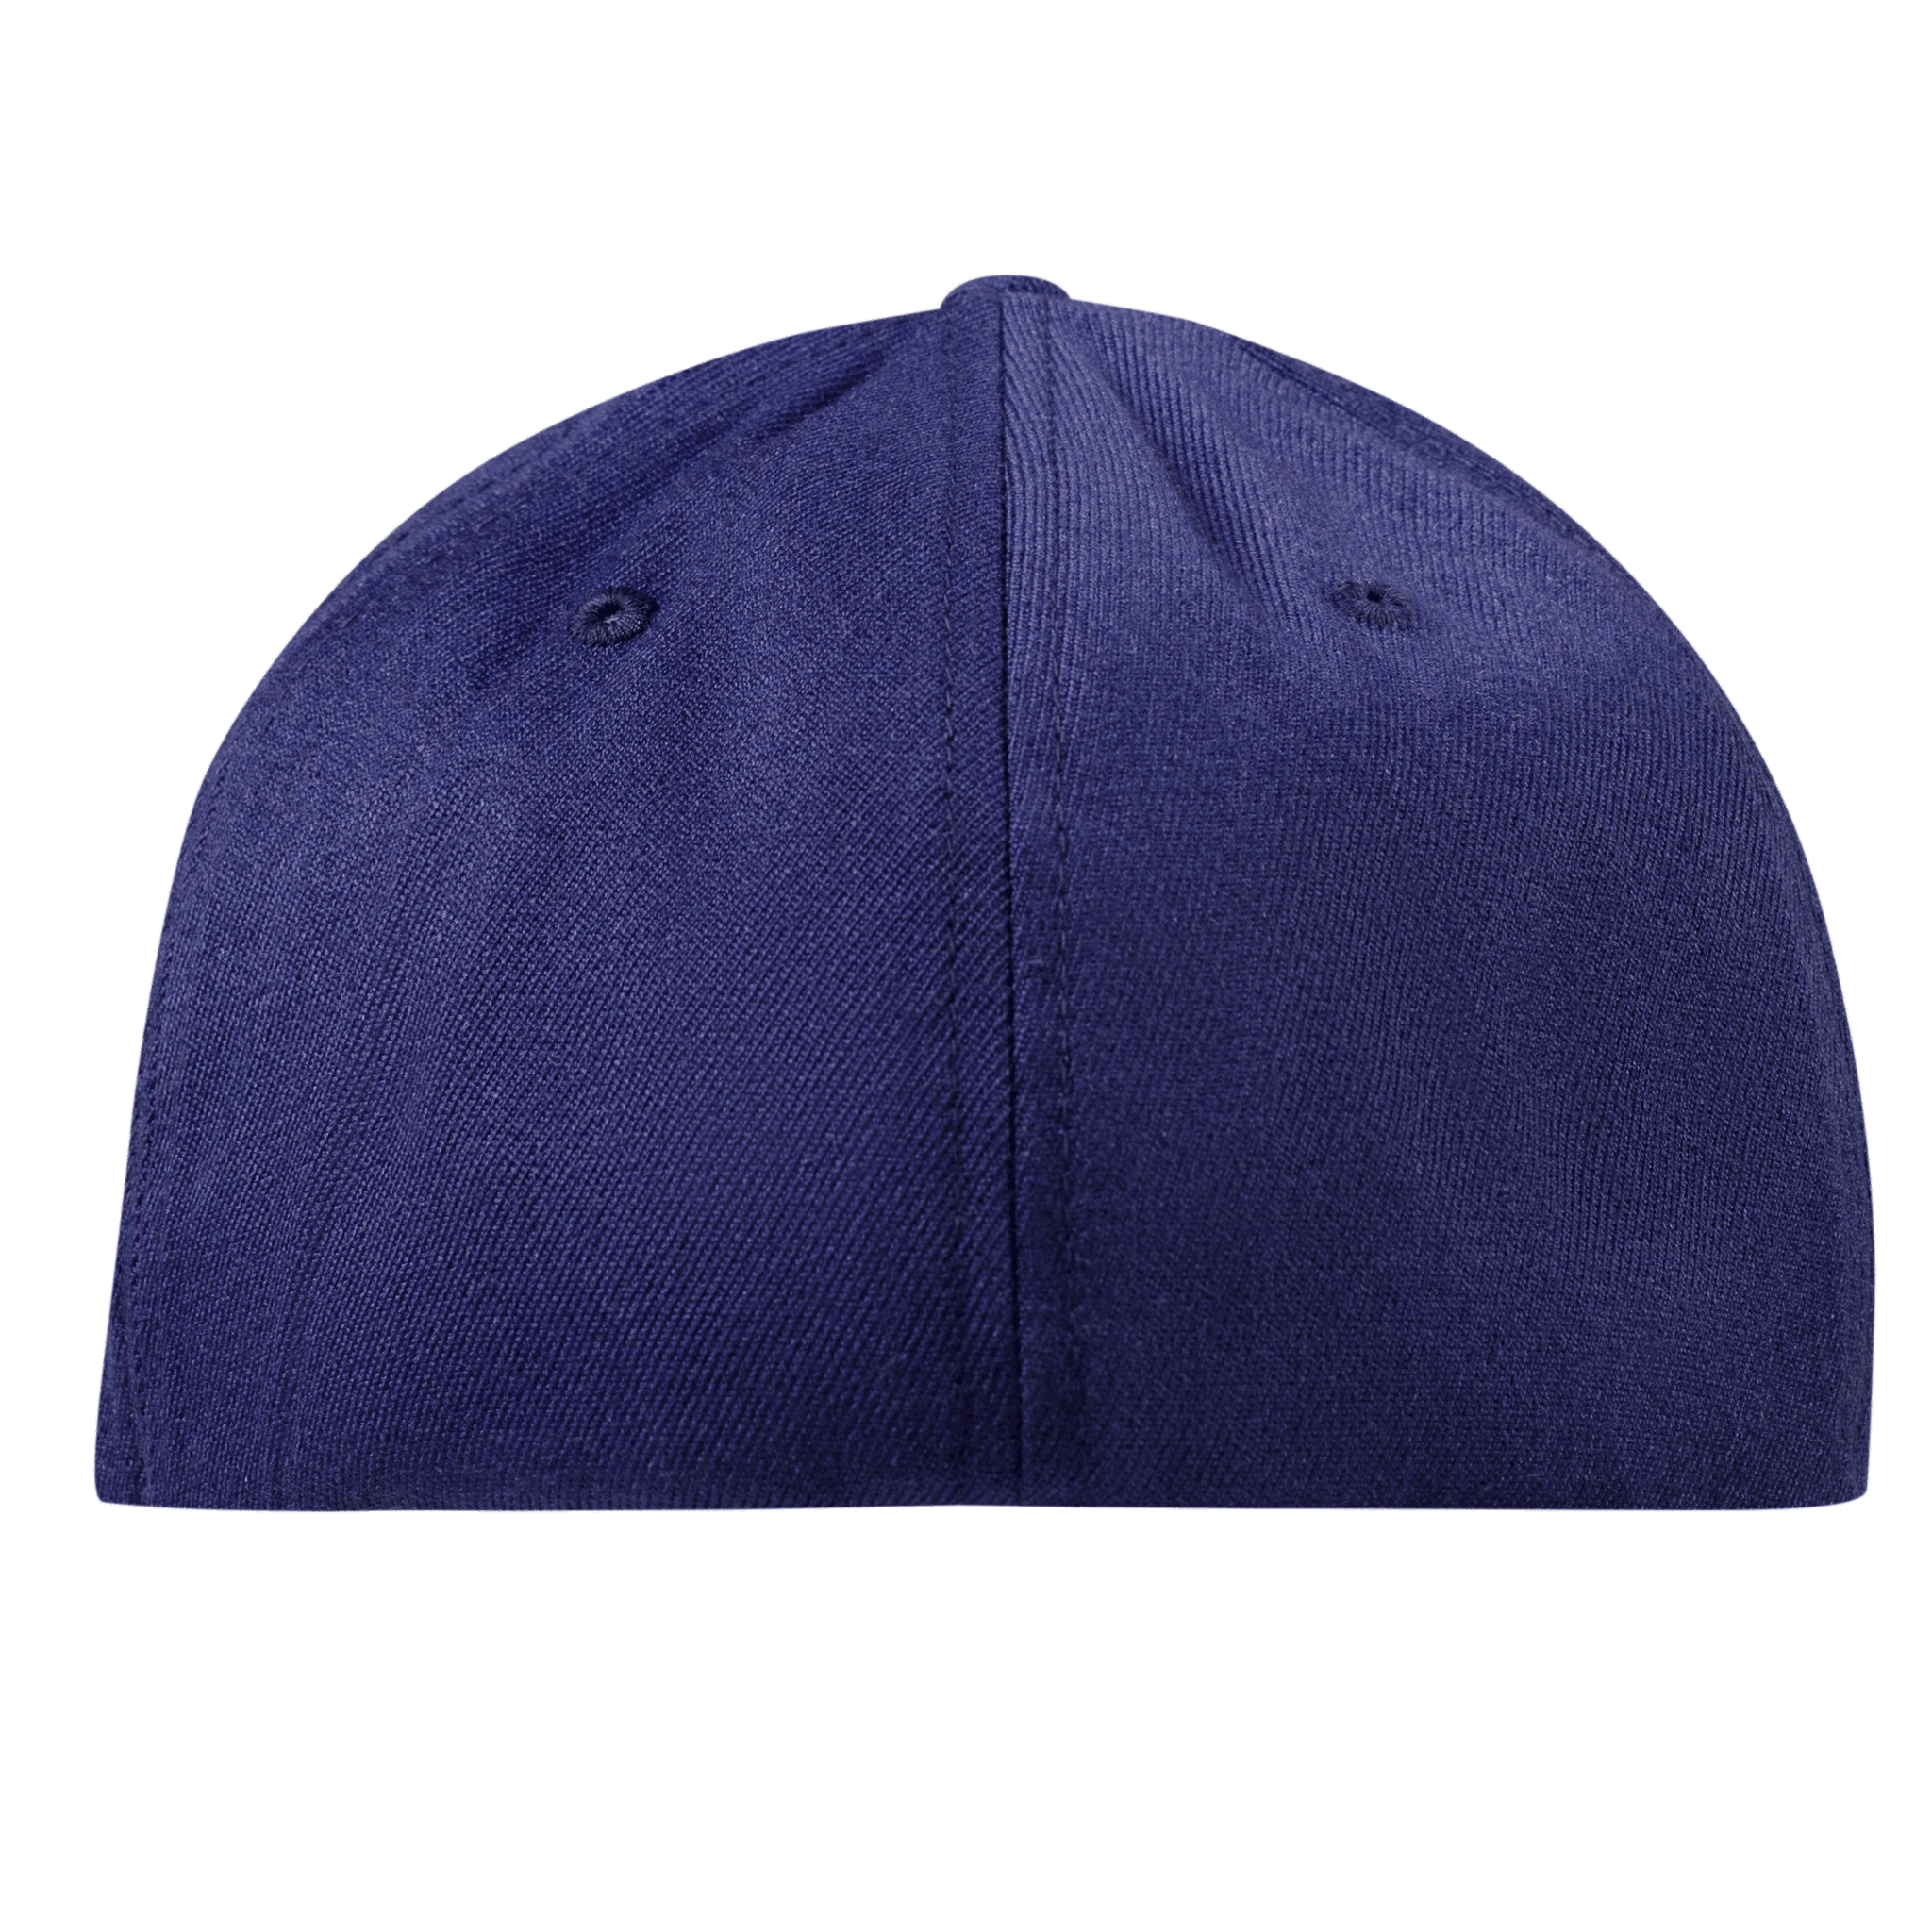 Indiana 19 Midnight Flexfit Fitted Back Navy